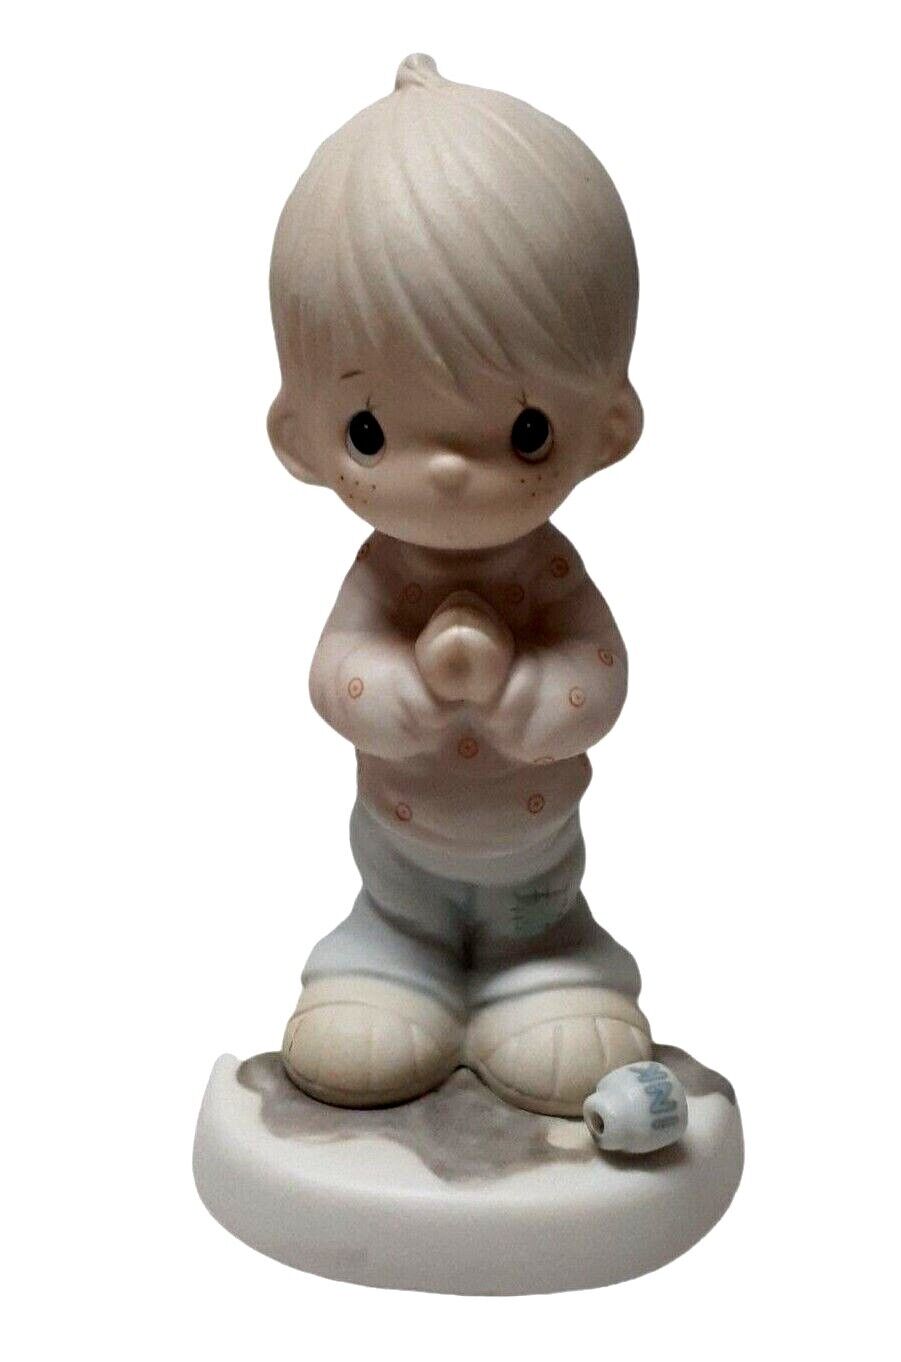 Precious Moments Praying Boy Figurine Retired 86 Help Lord Religious